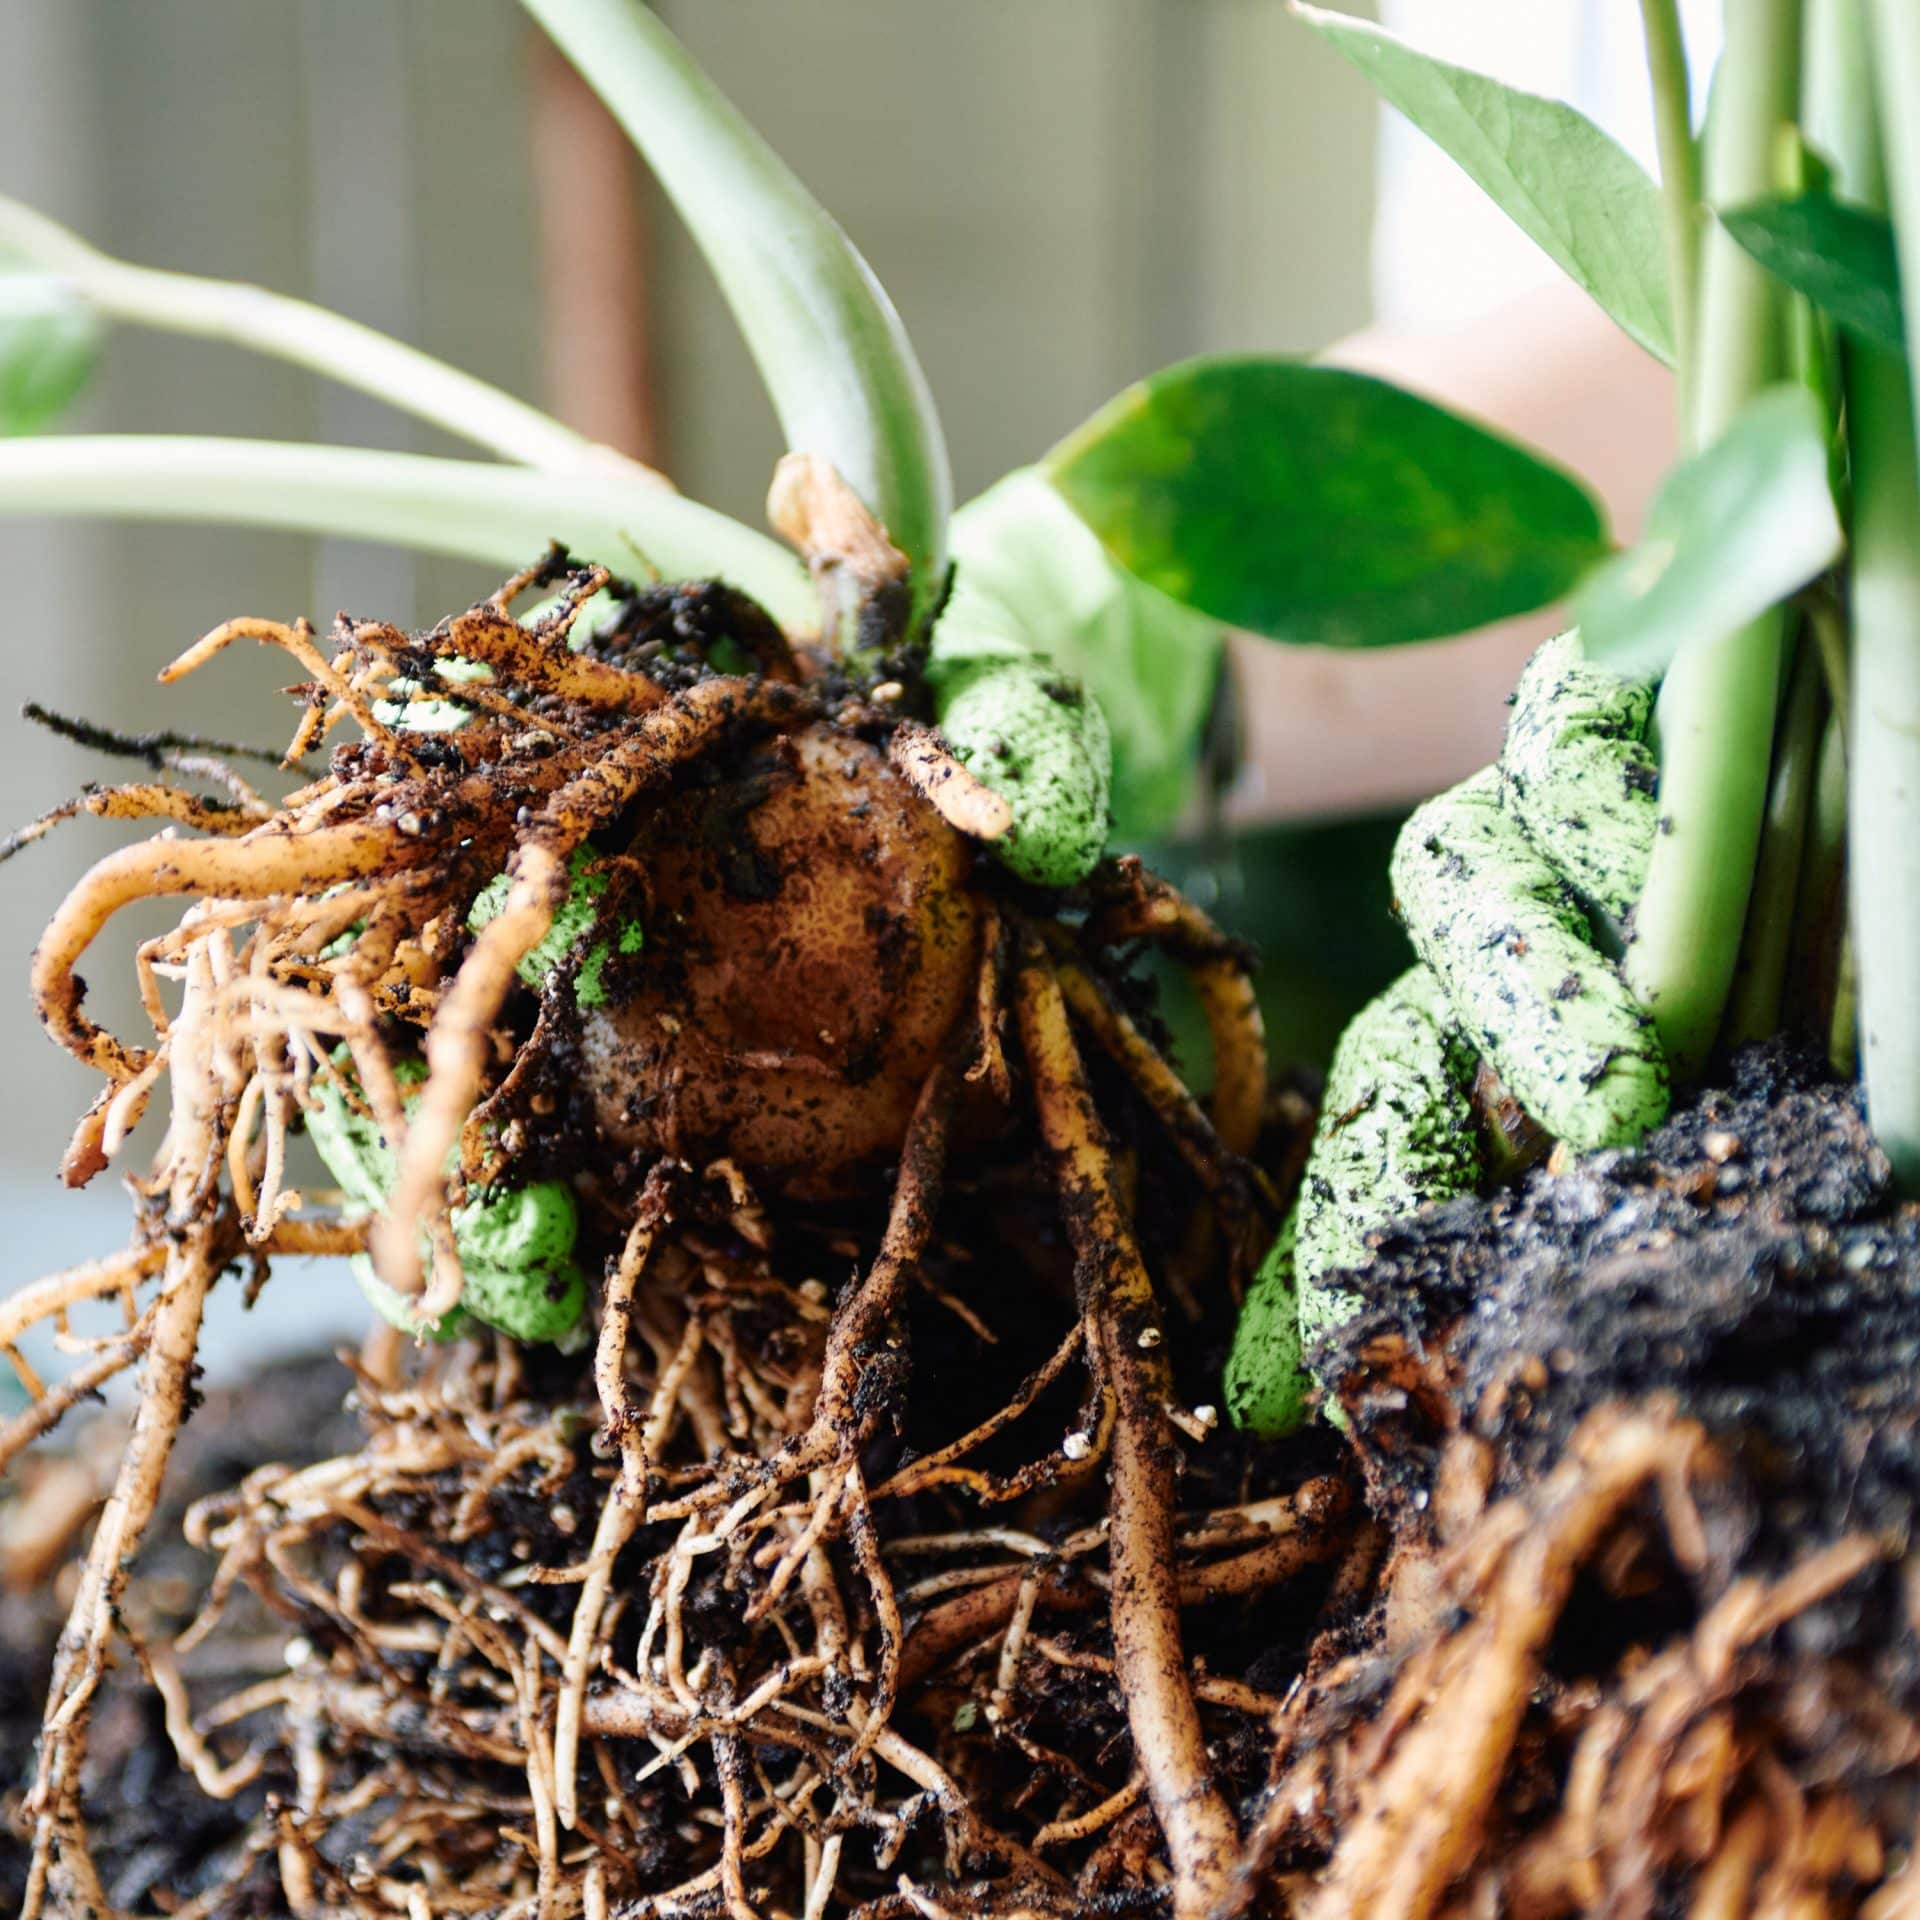 Close-up of a ZZ plant's rhizome being carefully separated by a gardener's hands, wearing green gardening gloves. The image shows the bulbous rhizome surrounded by dense roots and moist soil, with the hands applying gentle pressure. Green leaves and stems are emerging from the top, adding a lively touch to the scene.